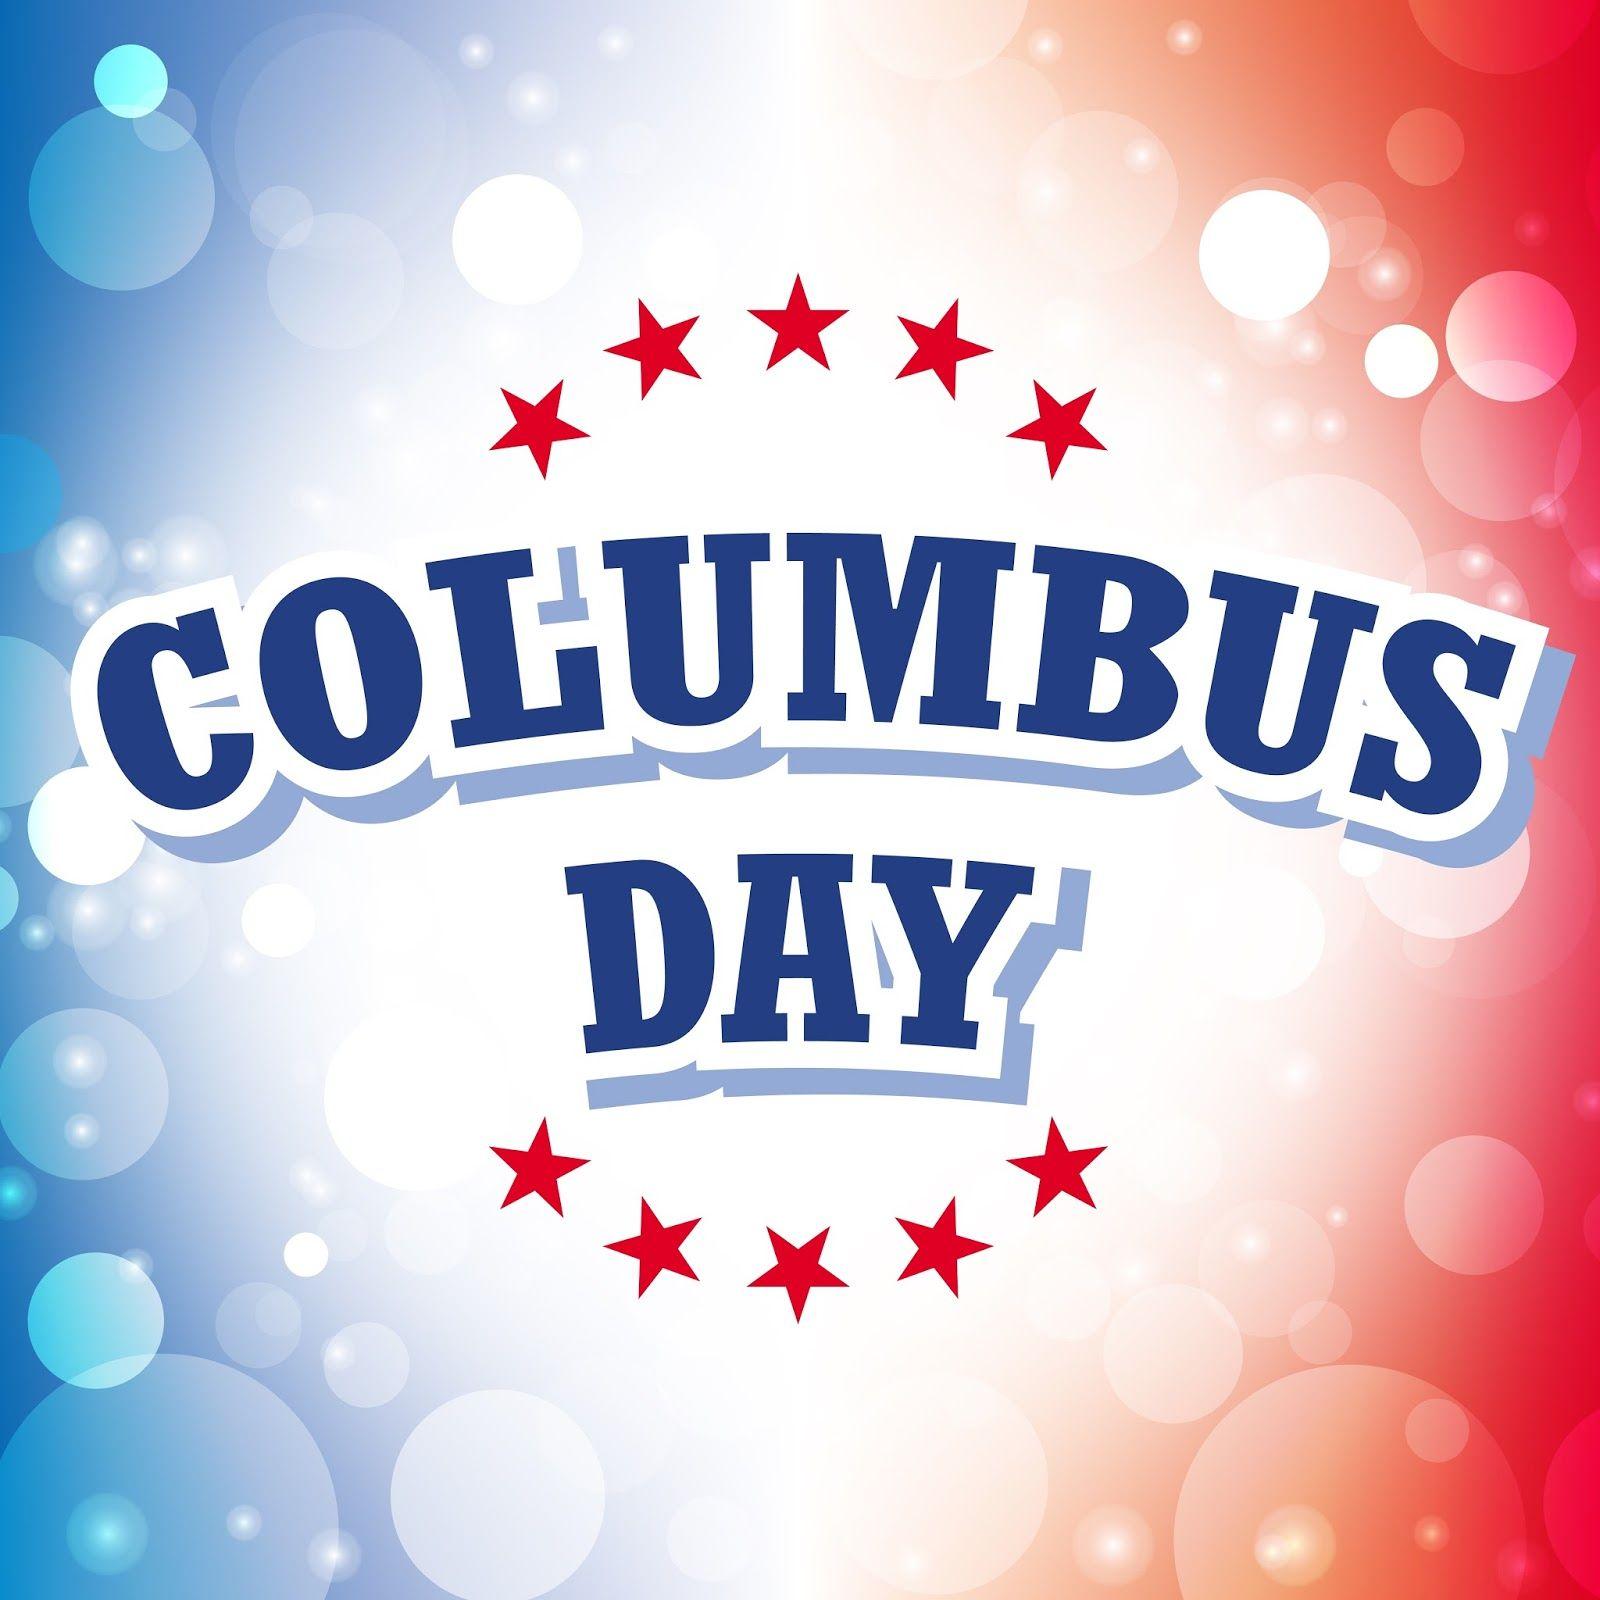 City Hall to be closed for holiday observance for Columbus Day on